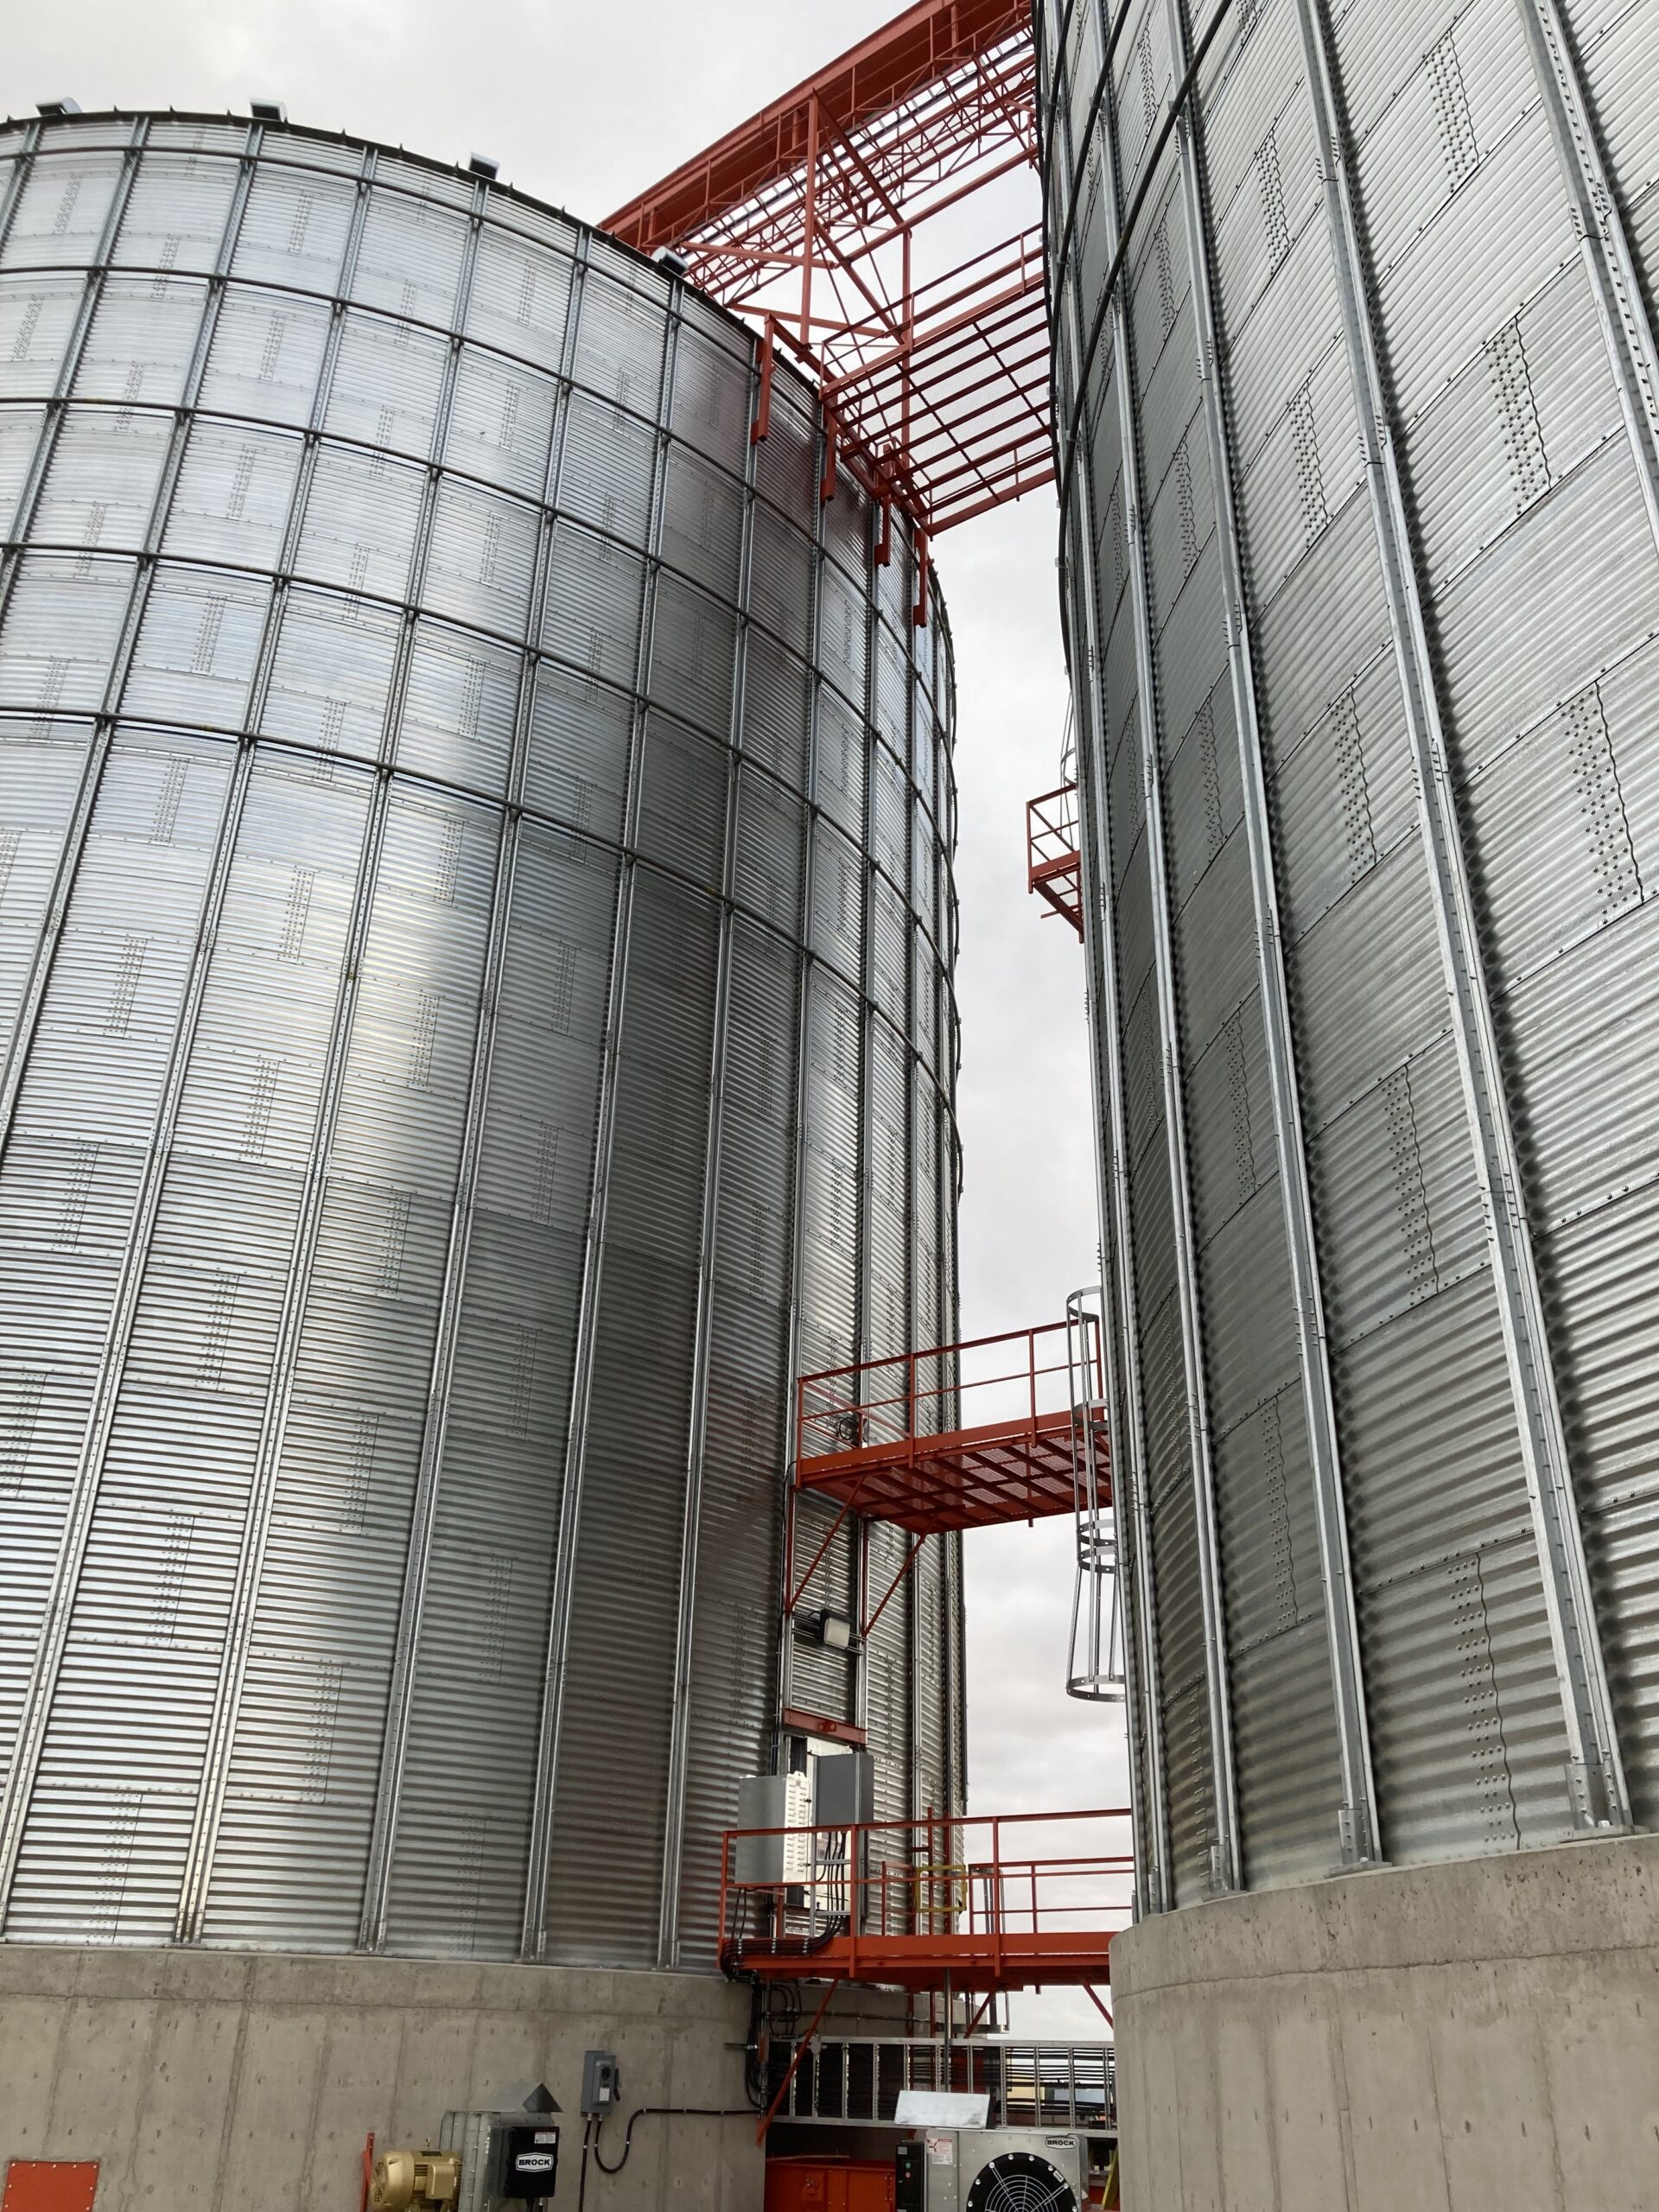 An exterior view of an orange grain elevator between two grain storage systems at Richardson Pioneer